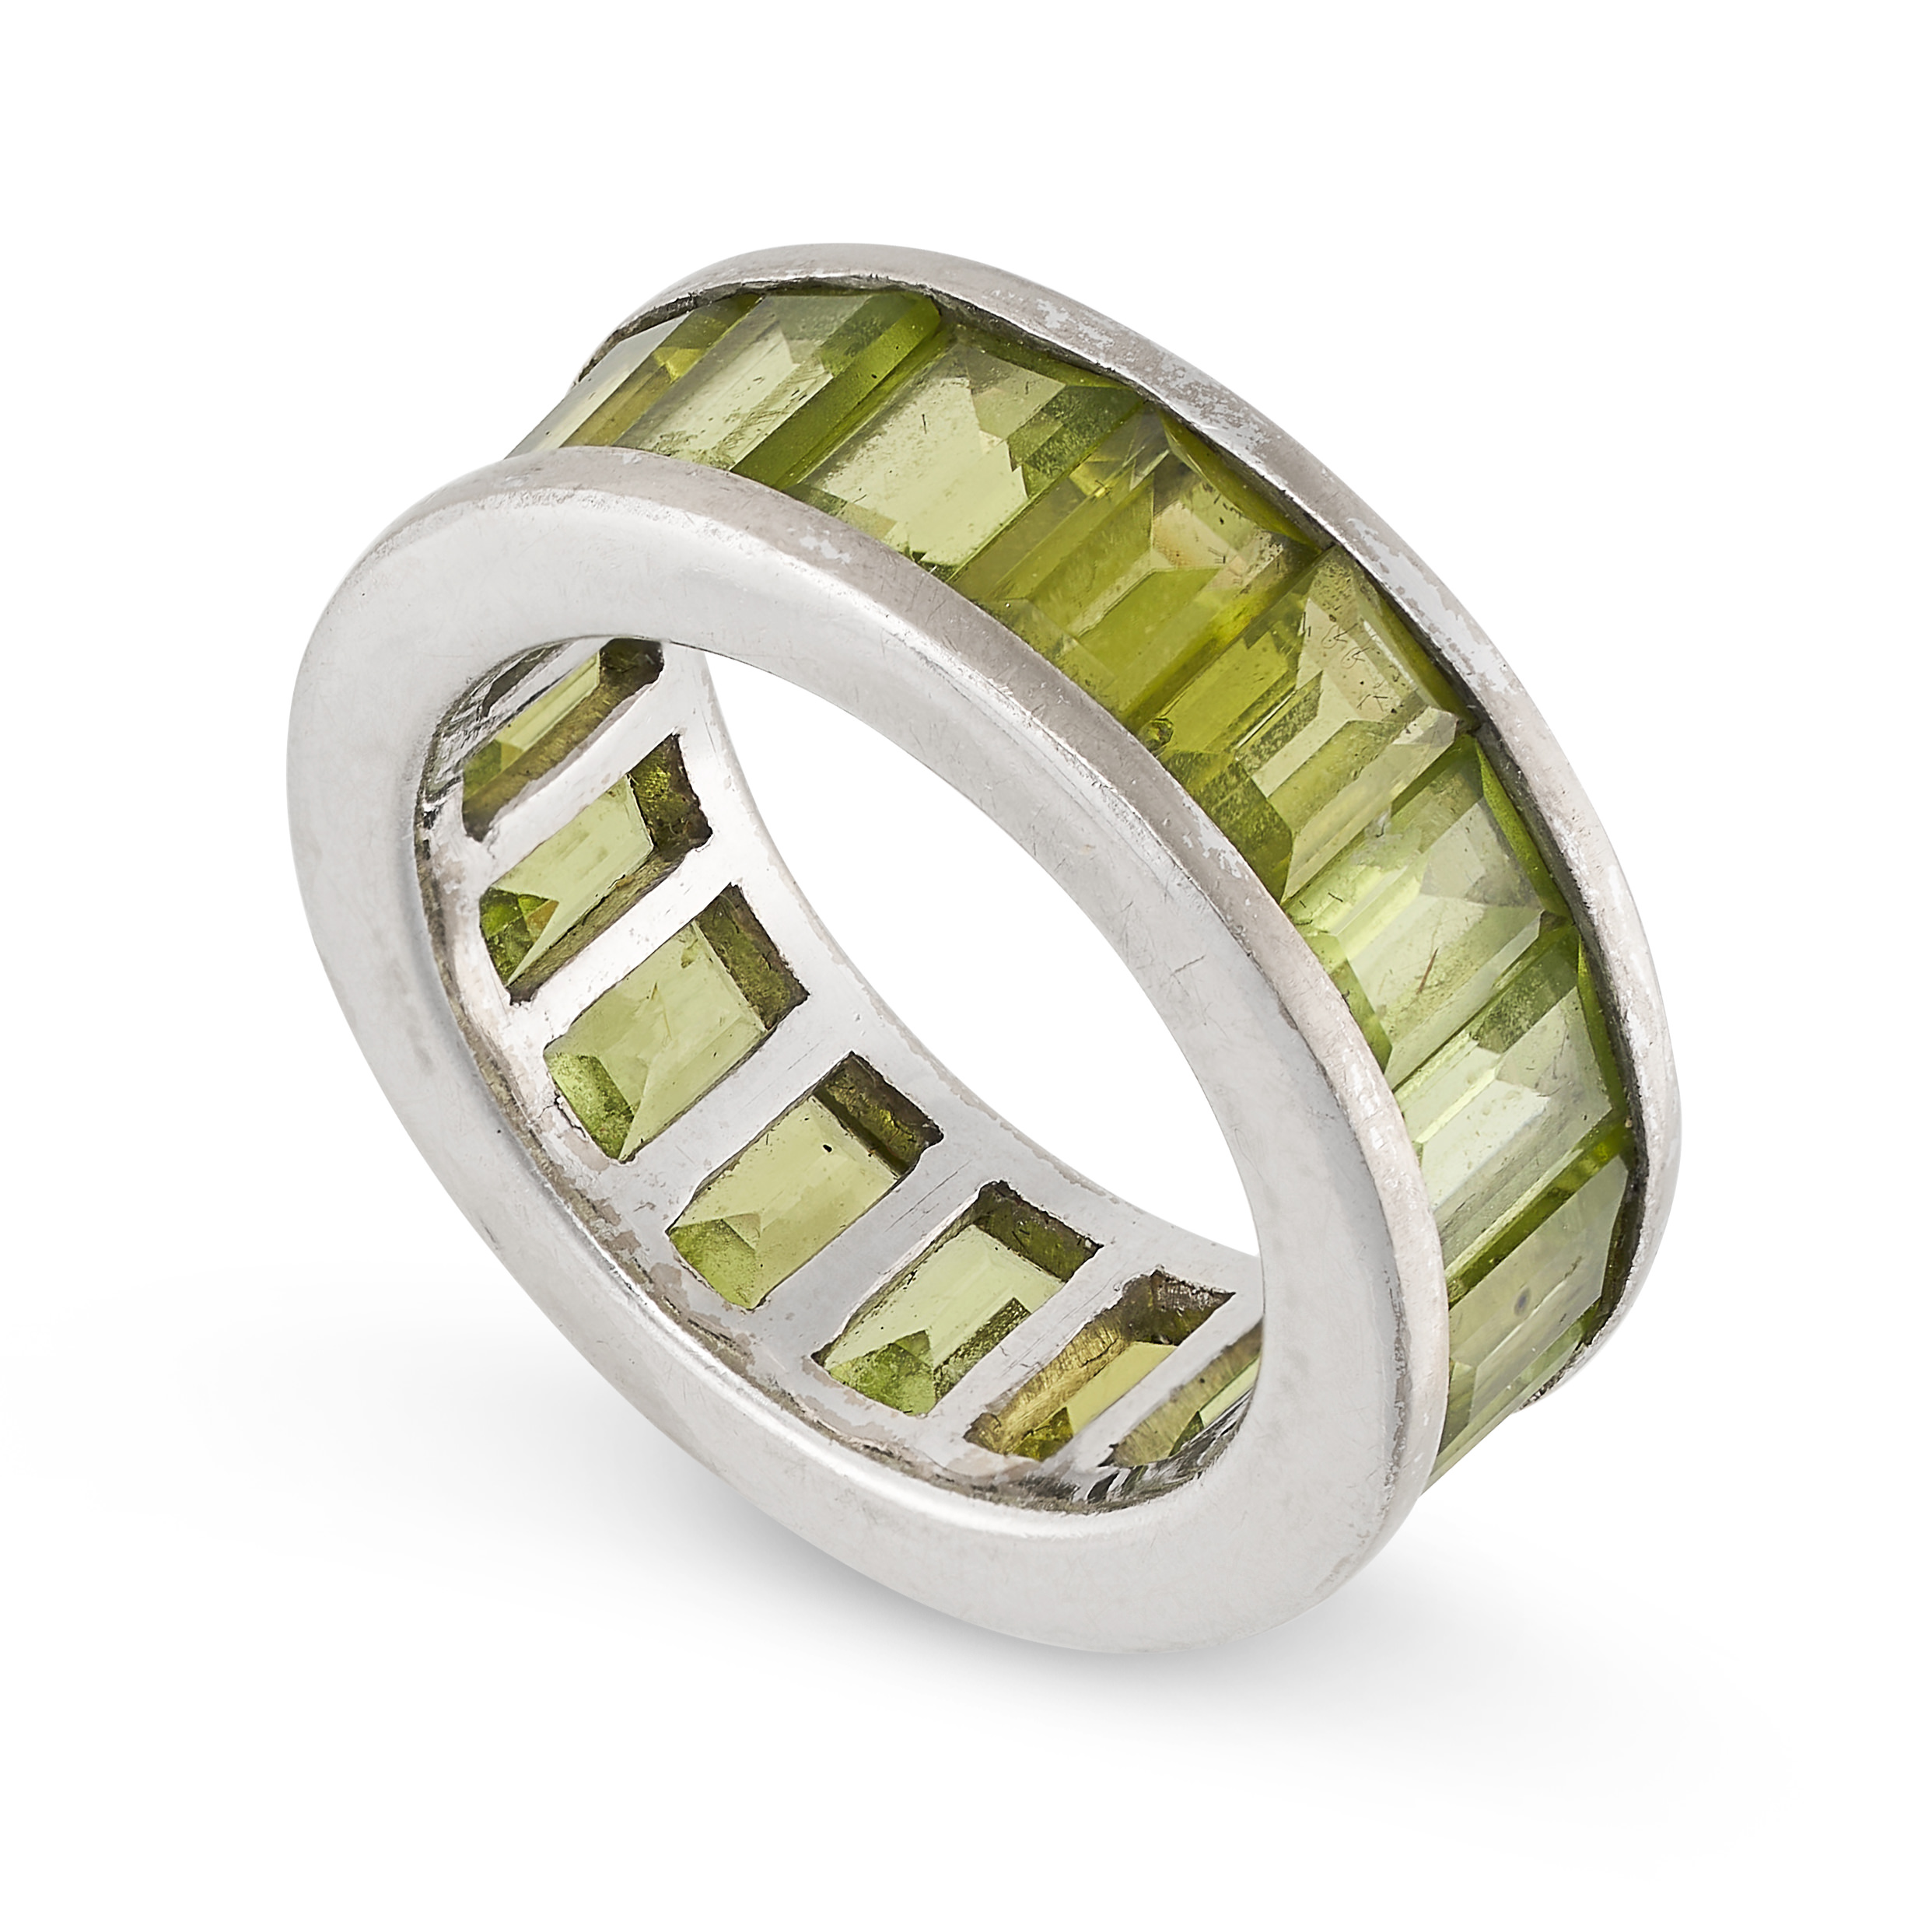 NO RESERVE - A PERIDOT ETERNITY BAND RING in platinum, the band set all around with a single row - Image 2 of 2